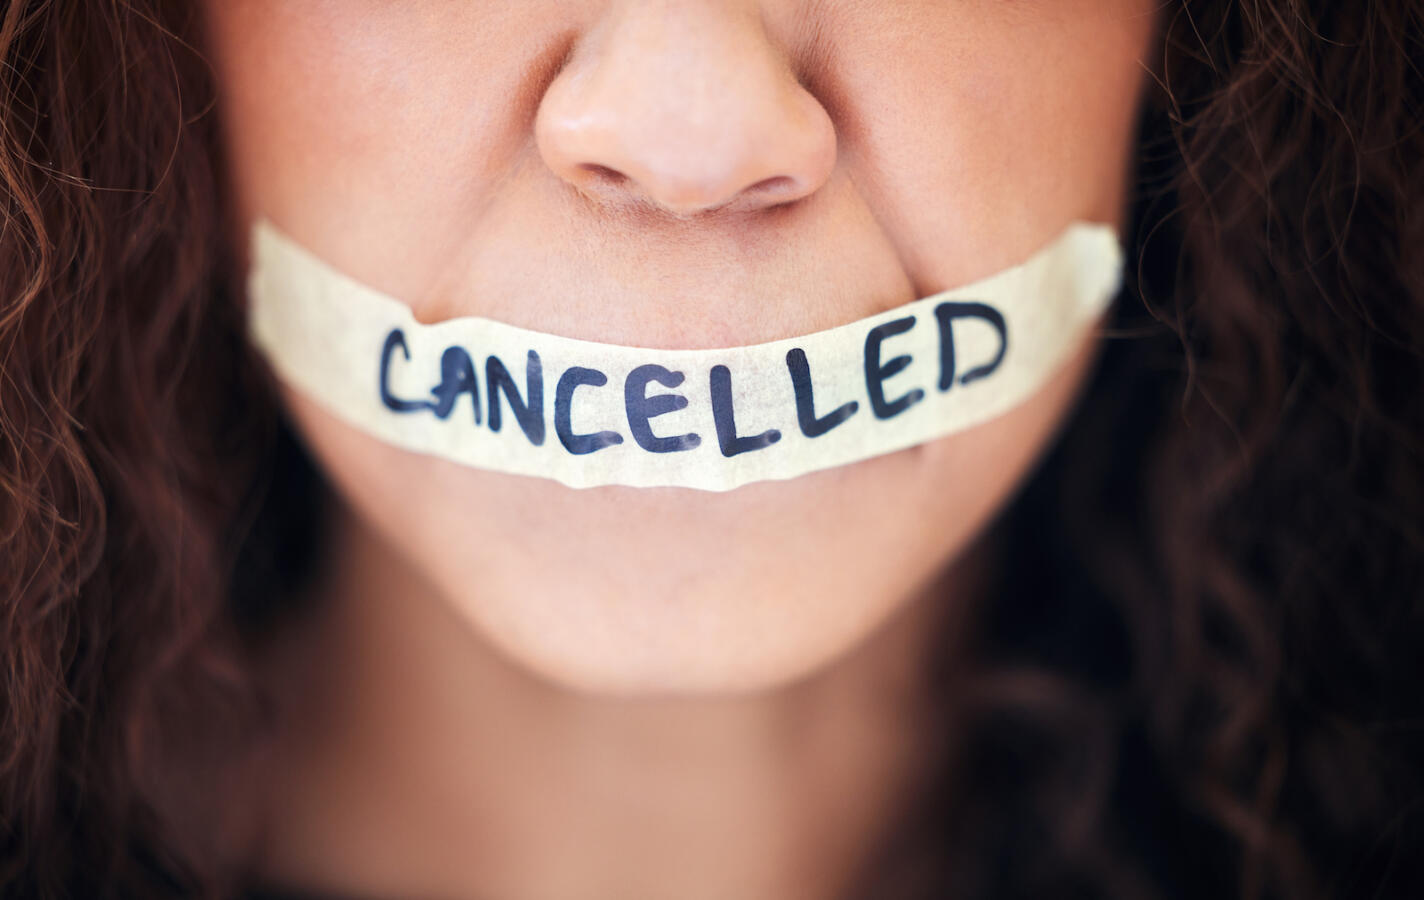 Closeup shot of an unrecognisable woman with tape on her mouth that has the word "cancelled" written on it